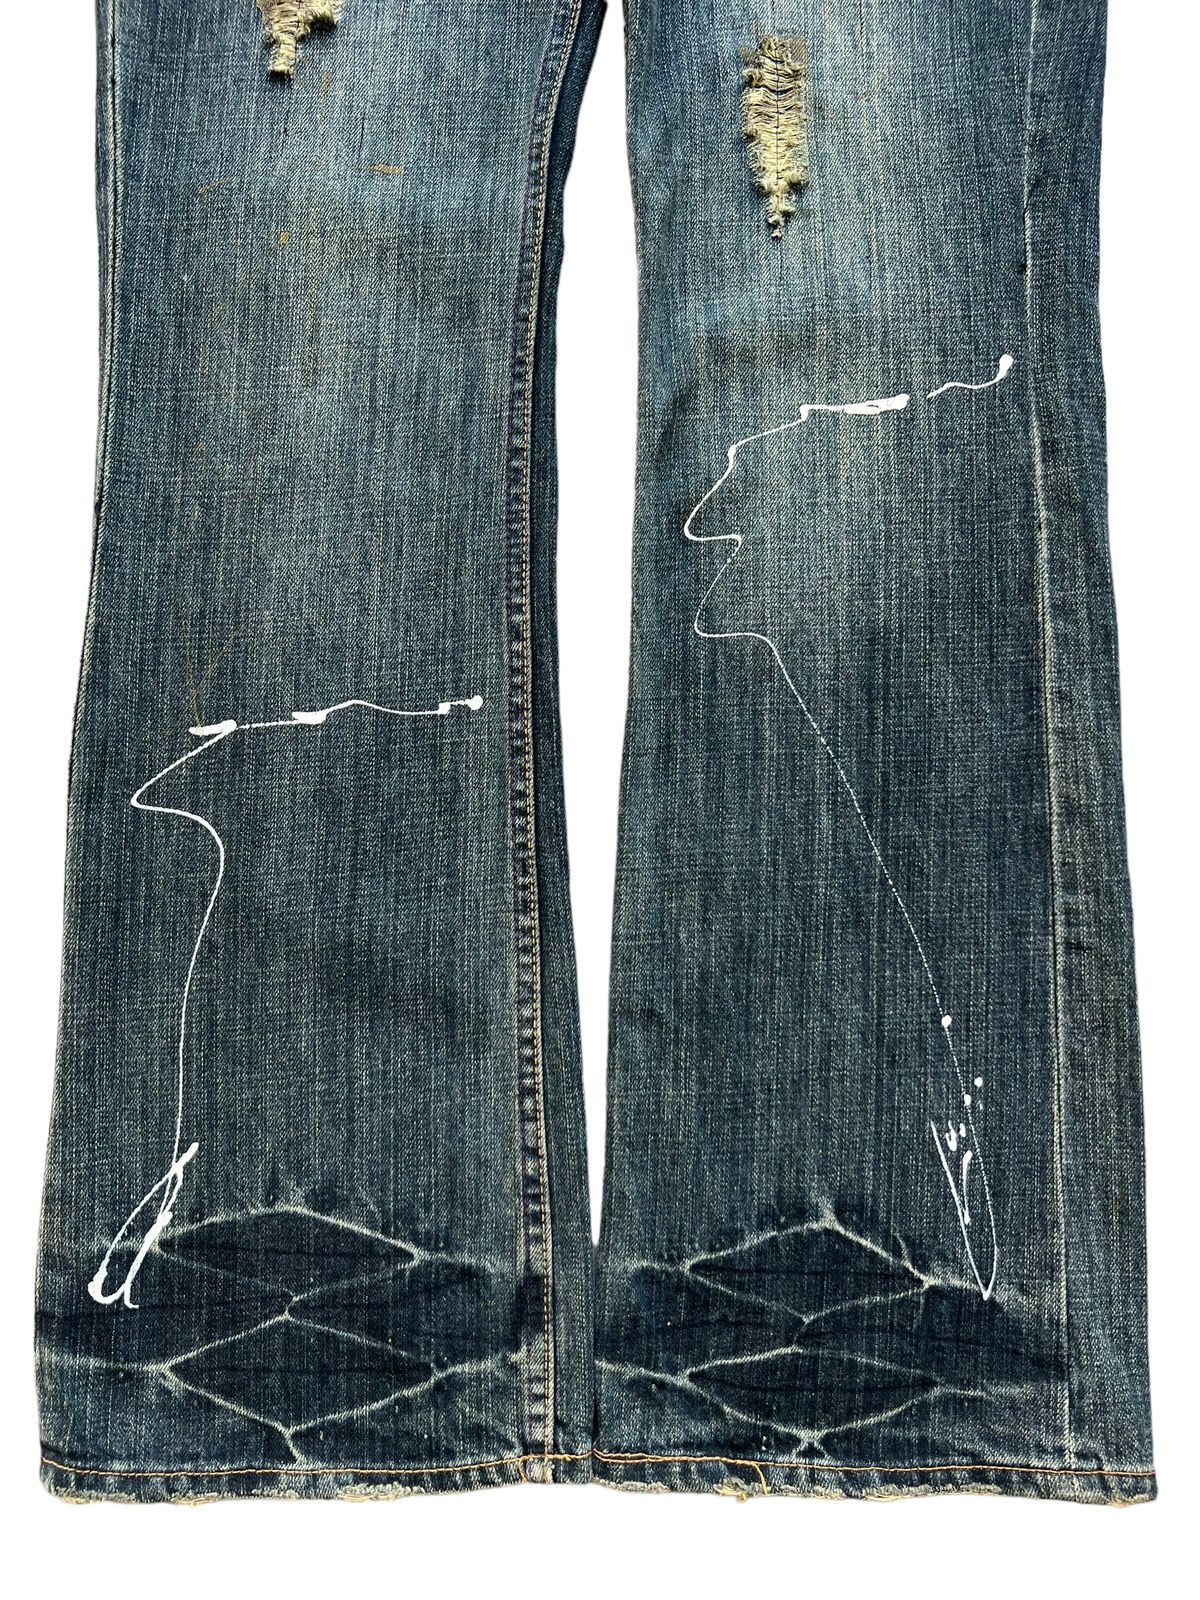 Hype - Roots Japan Distressed Riped Rusty Denim Painted Jeans 33x33 - 5